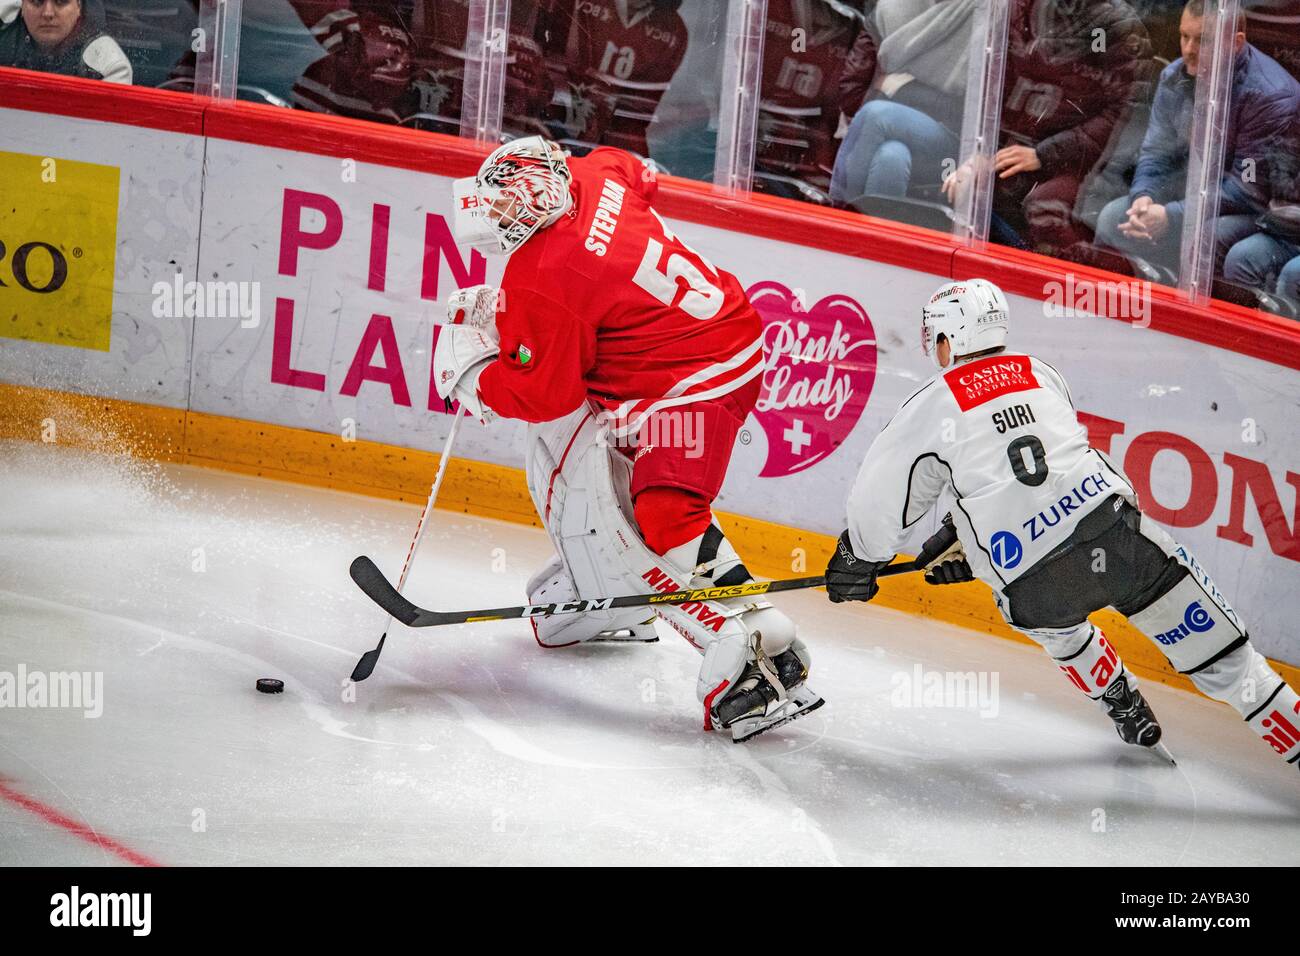 Lausanne, Switzerland. 02nd Apr, 2019. Stephan Tobias (goalkeeper) of Hc  Lausanne is a action during a Swiss League match with Lausanne Hc and Hc  Lugano (Photo by Eric Dubost/Pacific Press) Credit: Pacific